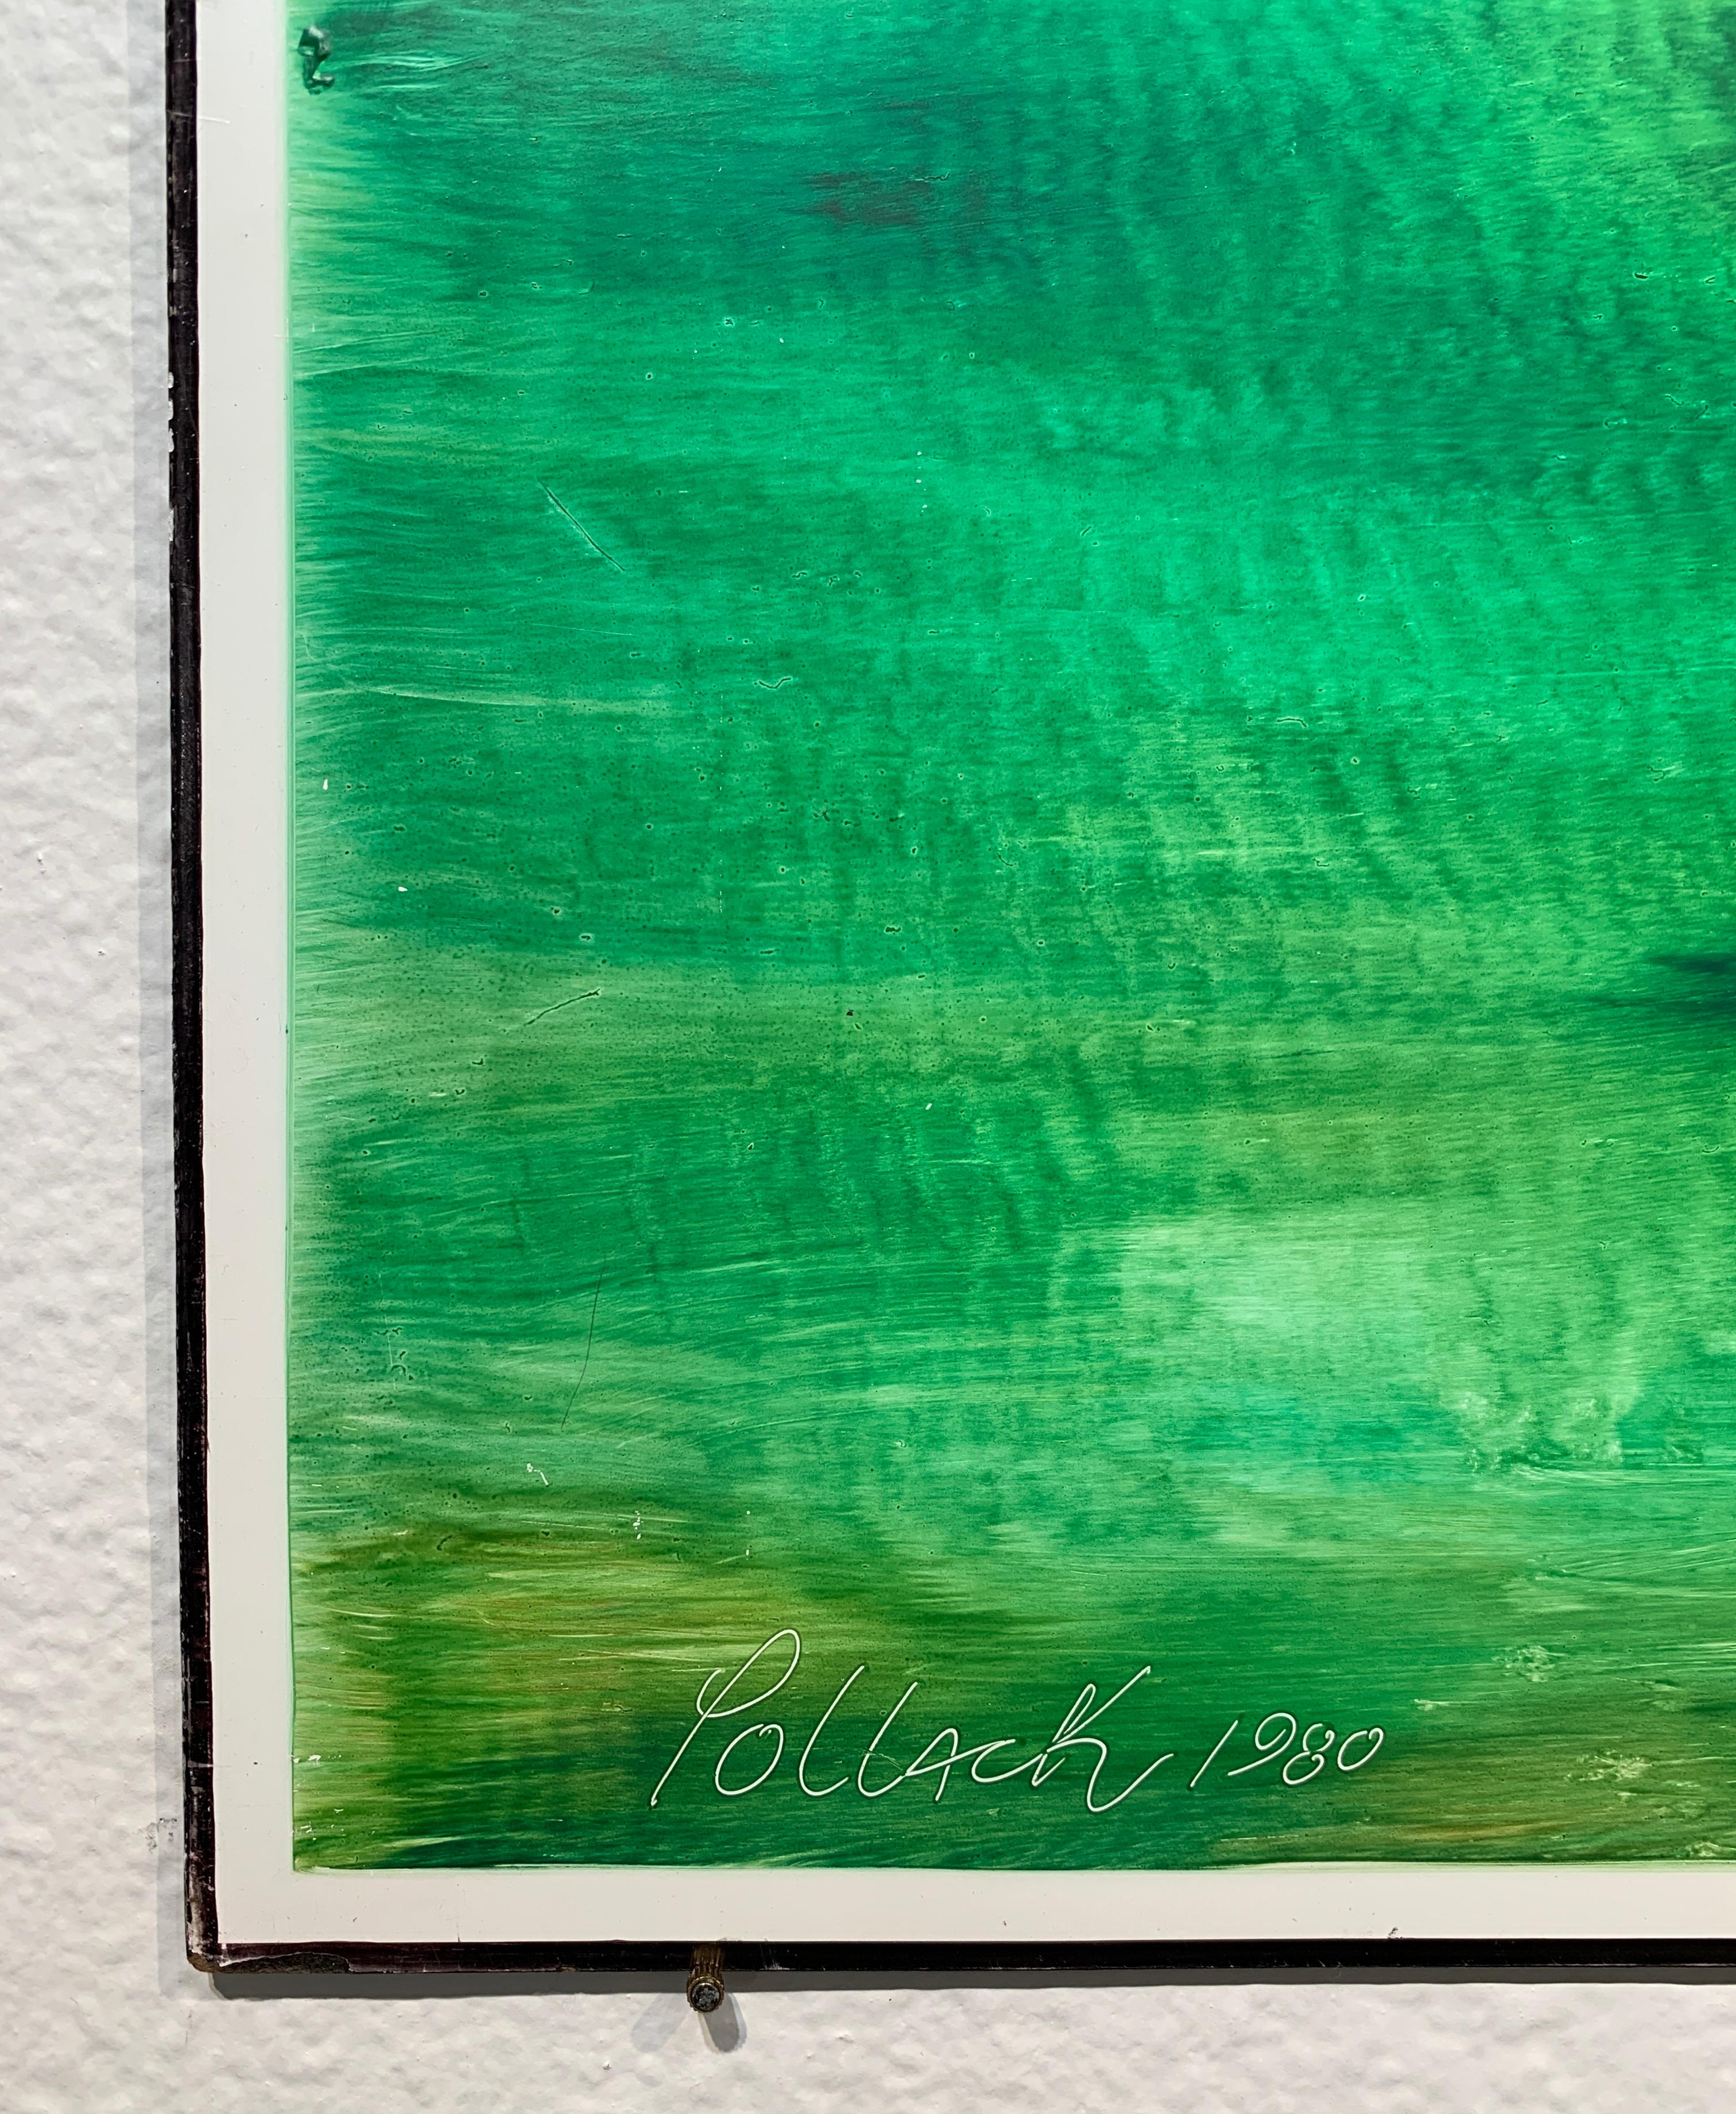 Mystical Event, Reginald Pollack Abstract Expressionist Oil on Masonite Green 2